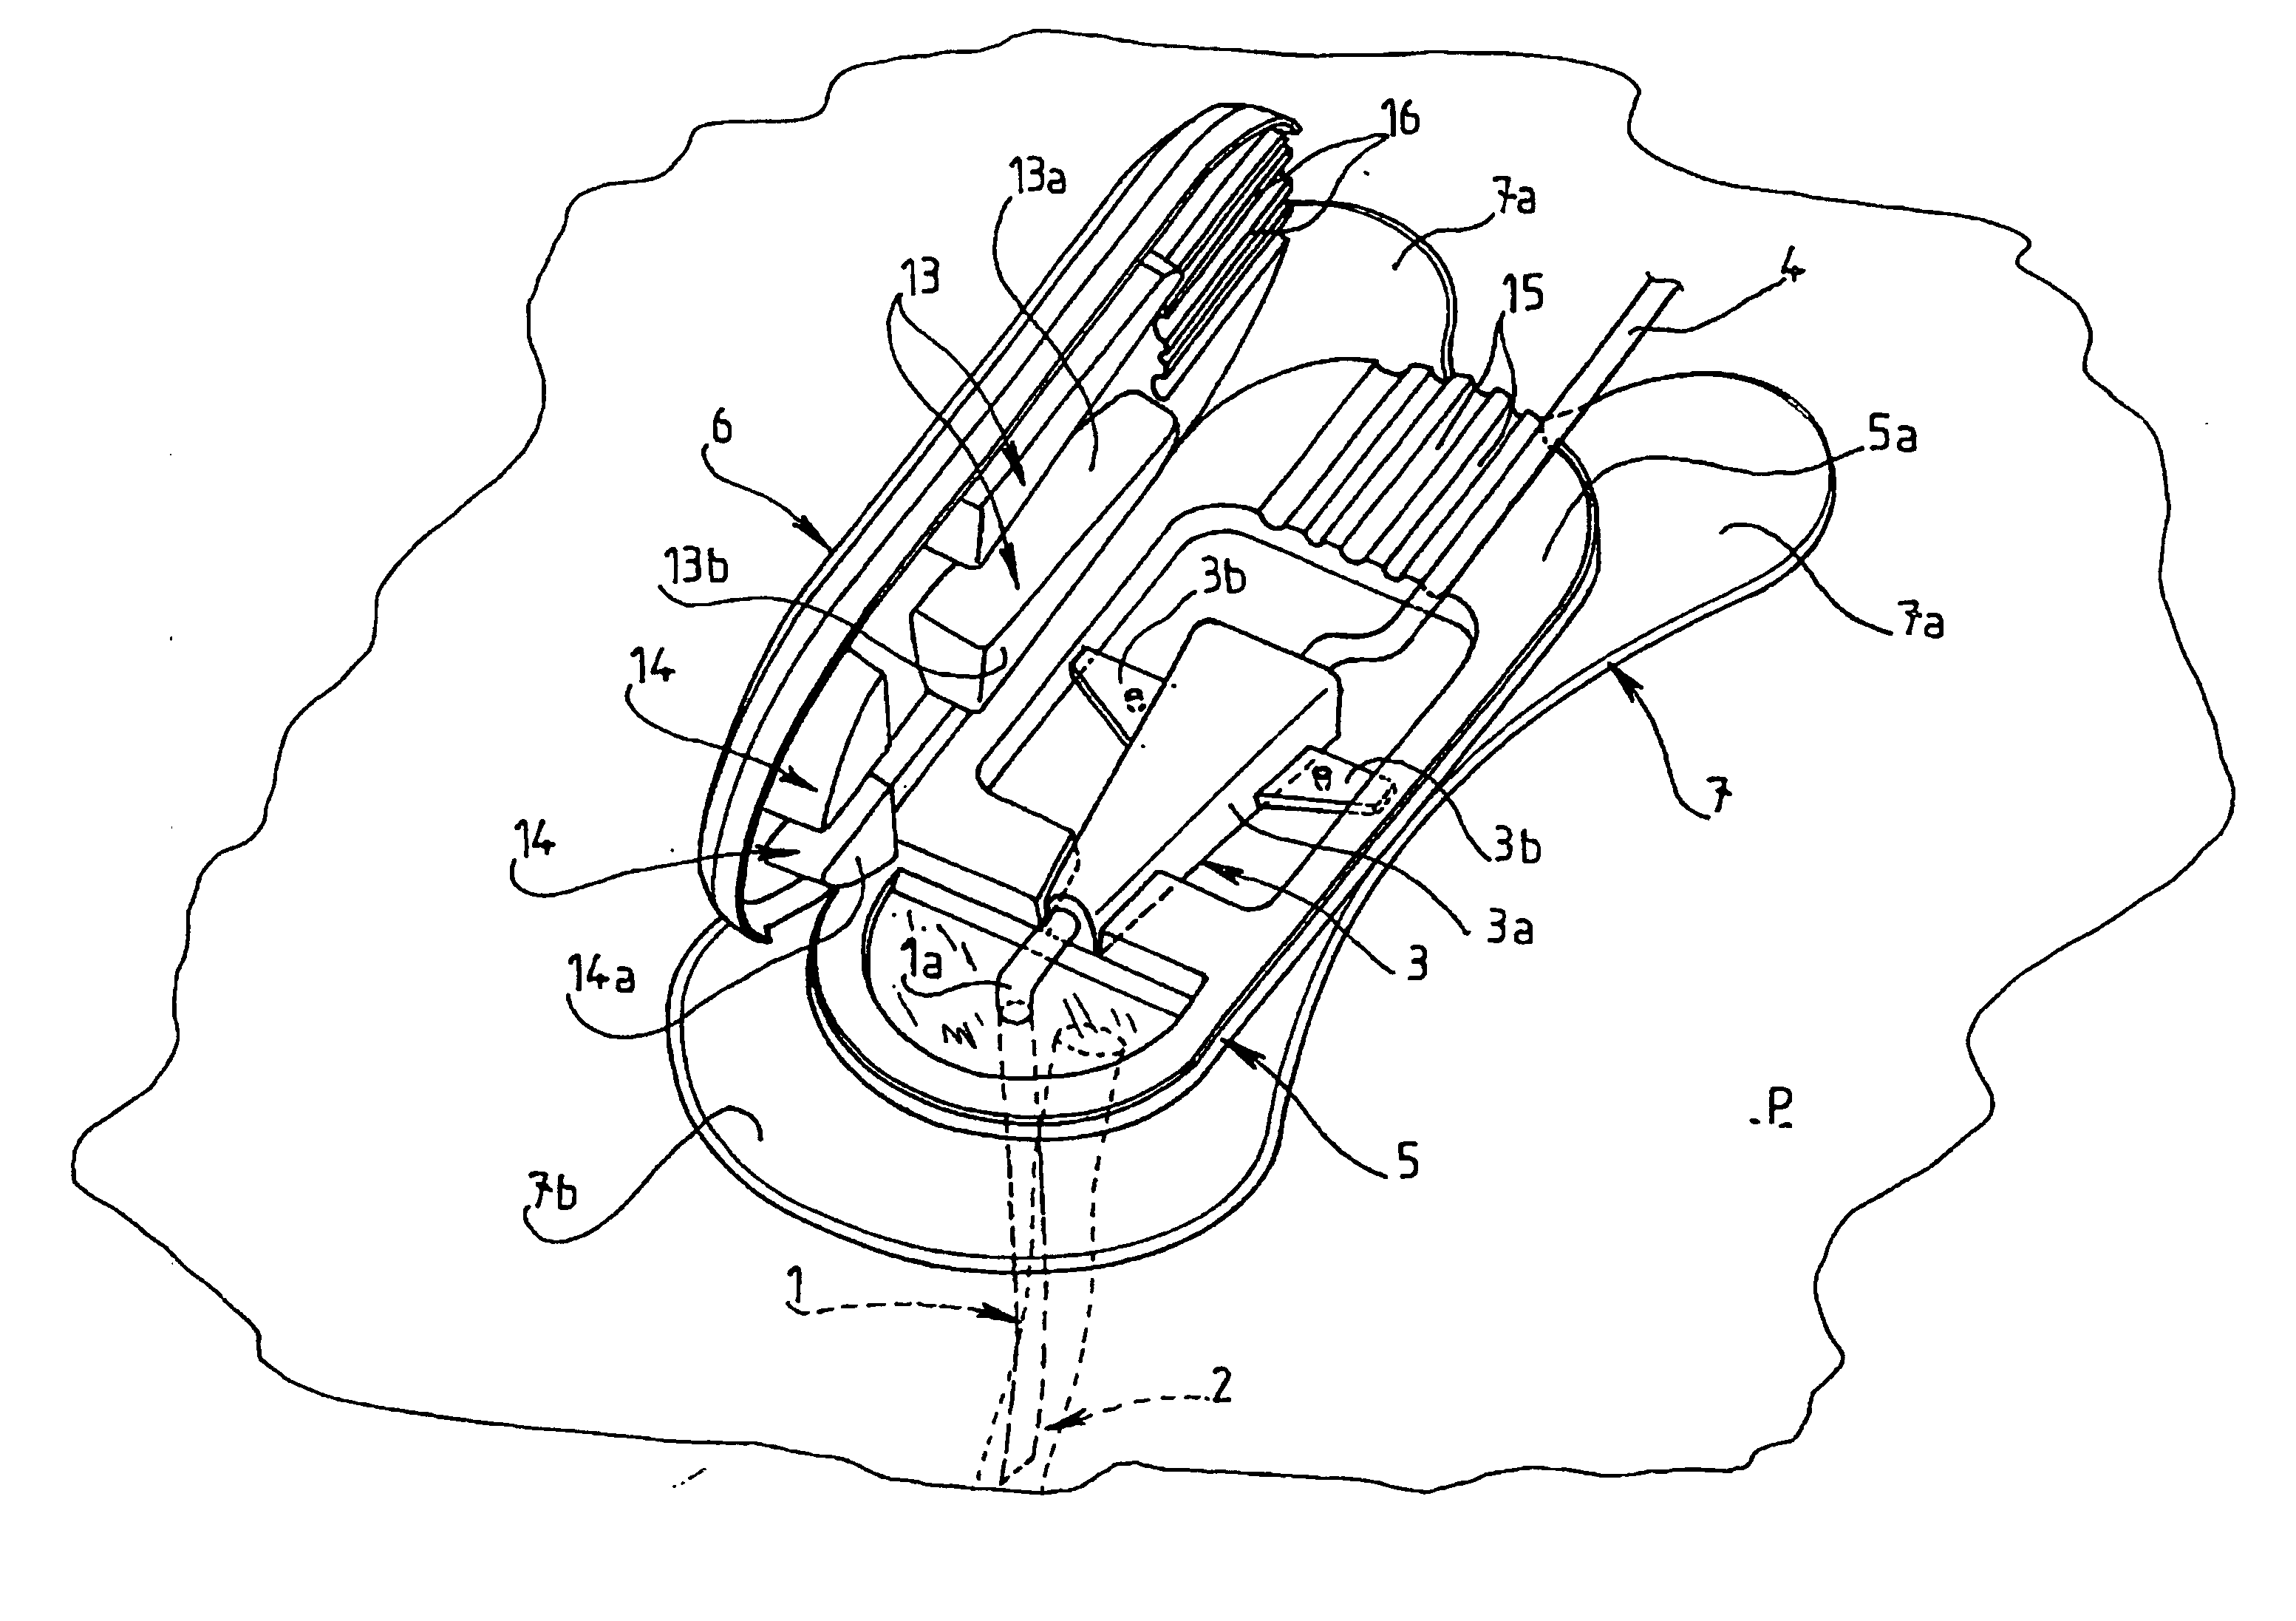 Device for fixing a catheter to the body of a patient